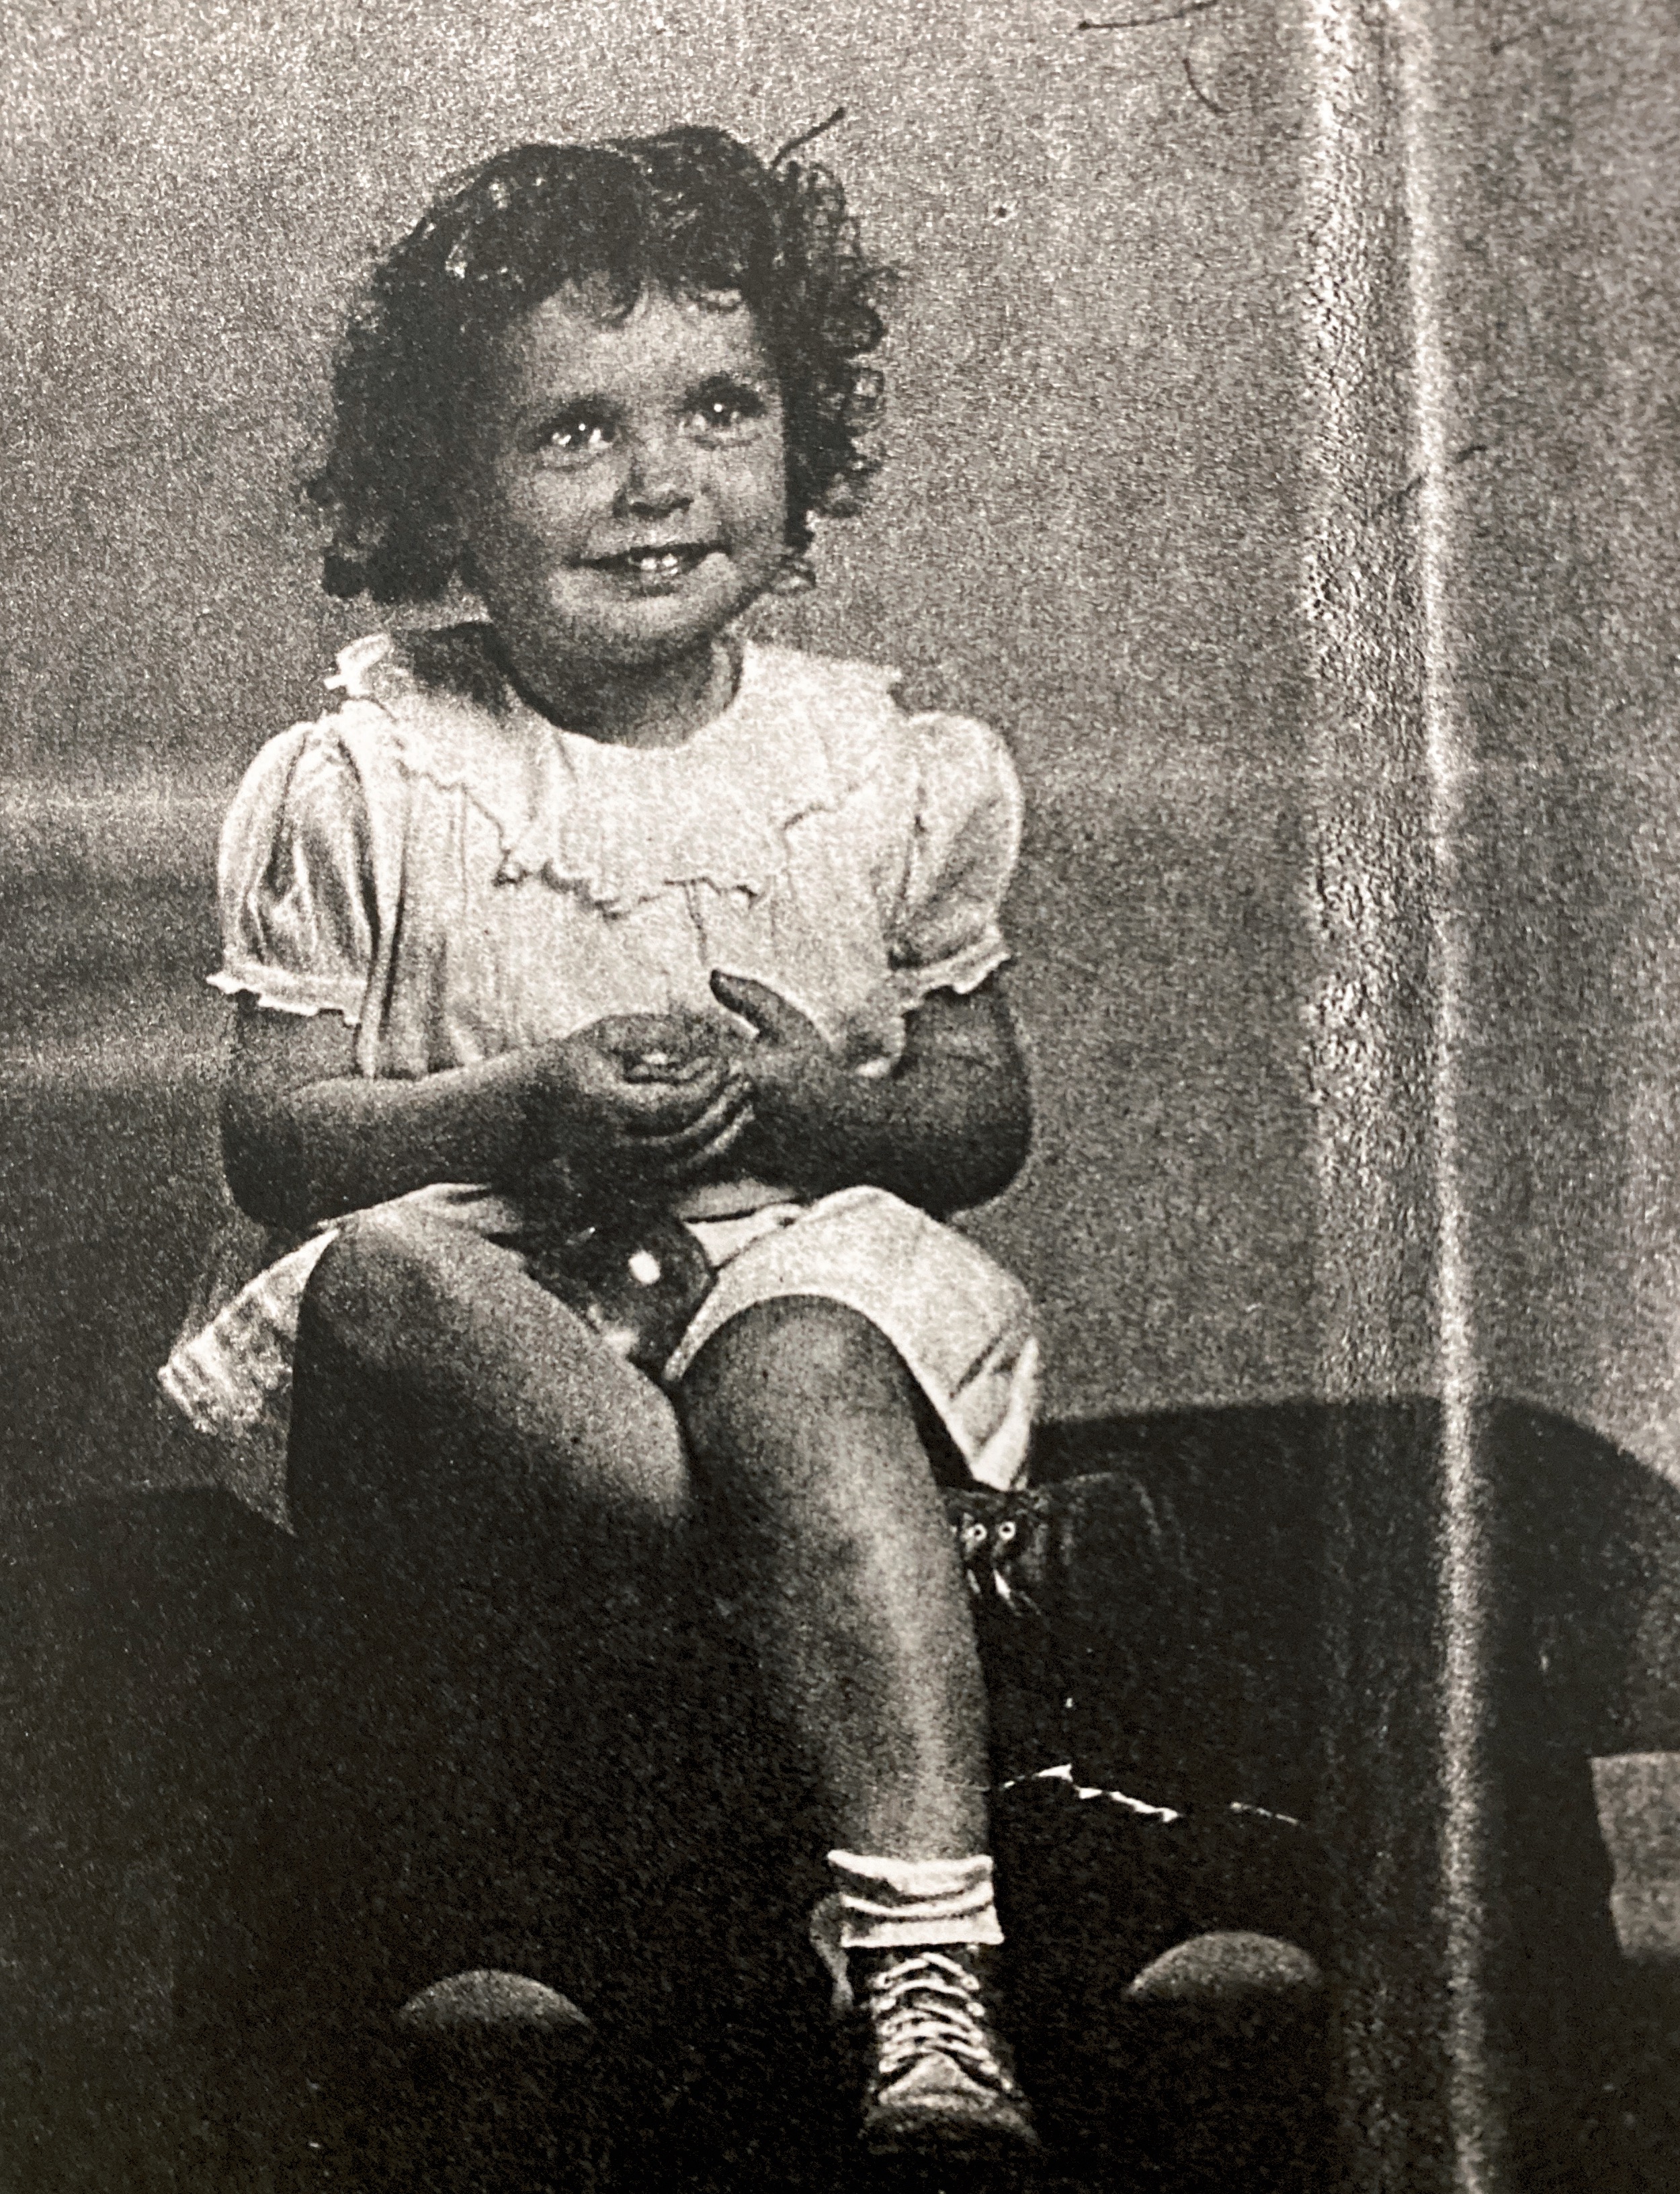 Mother 4 years old 2/29/1940